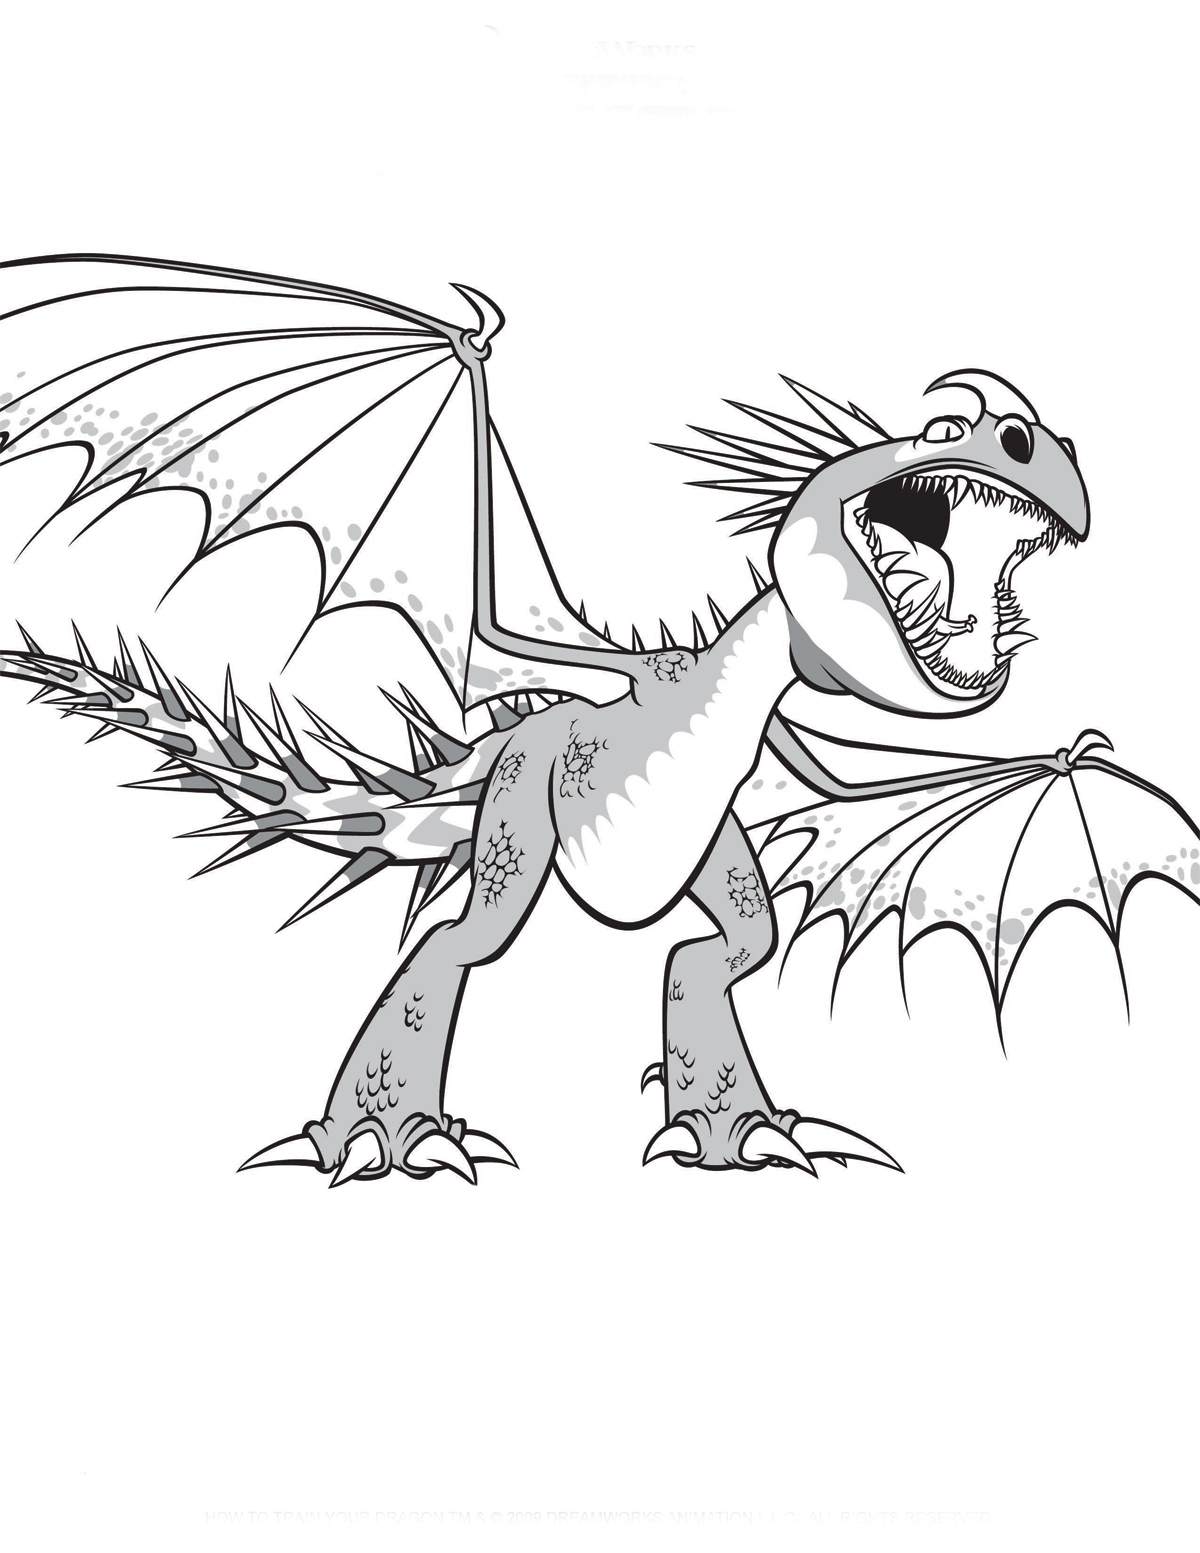 How to Train Your Dragon coloring pages to download and print for free